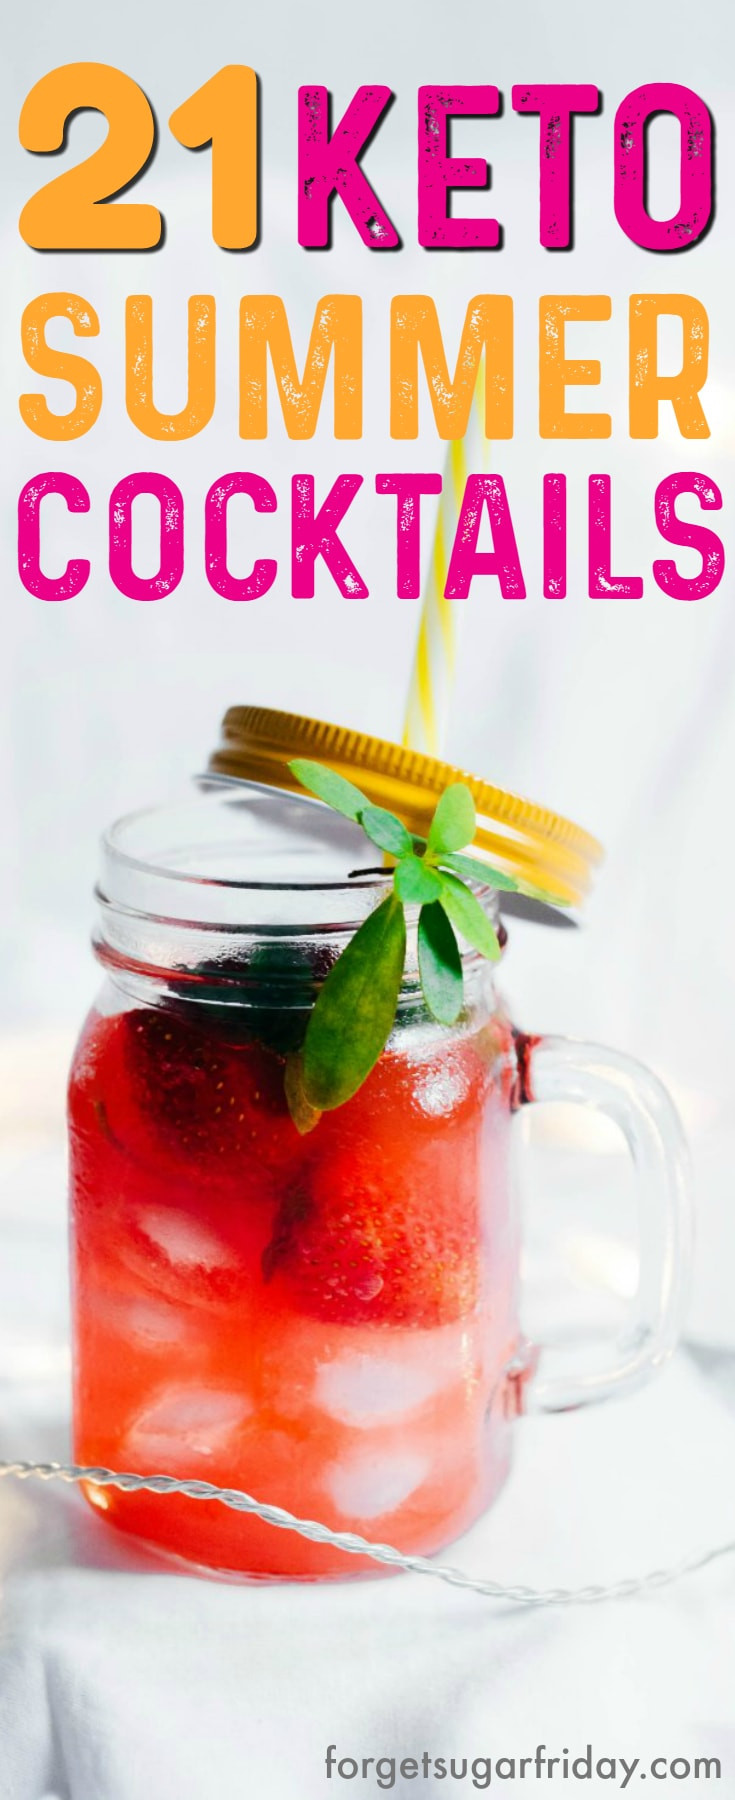 Summer Keto Cocktails
 21 Must Try Keto Cocktails That Taste Amazing For